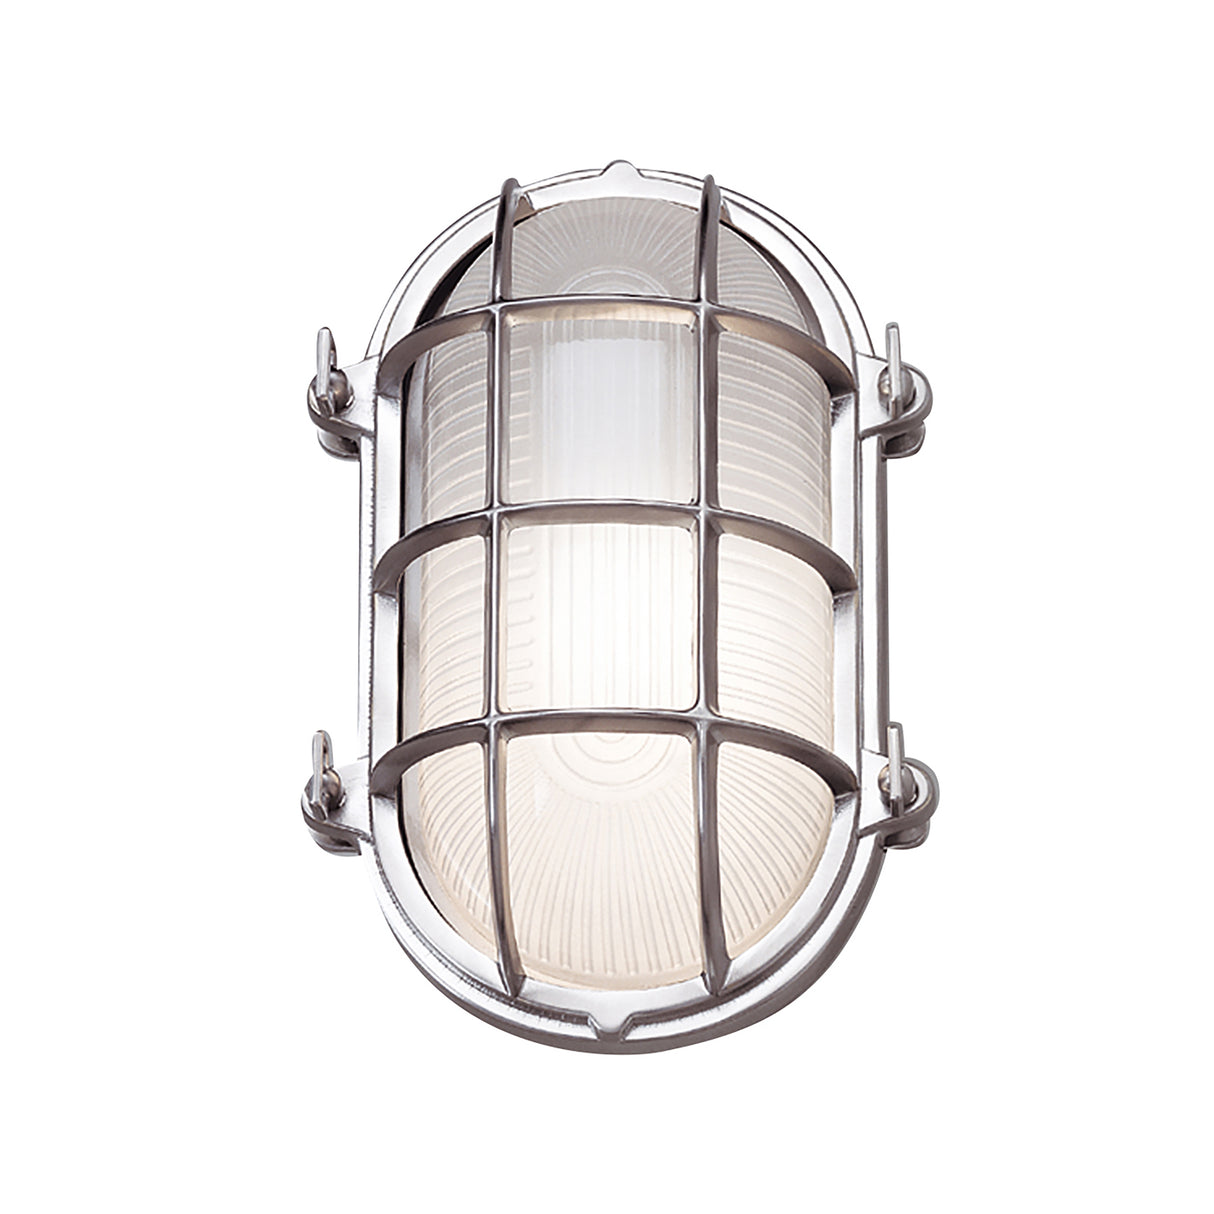 Elk 1101-CH-FR Mariner Oblong Outdoor Wall Light - Chrome With Frosted Glass